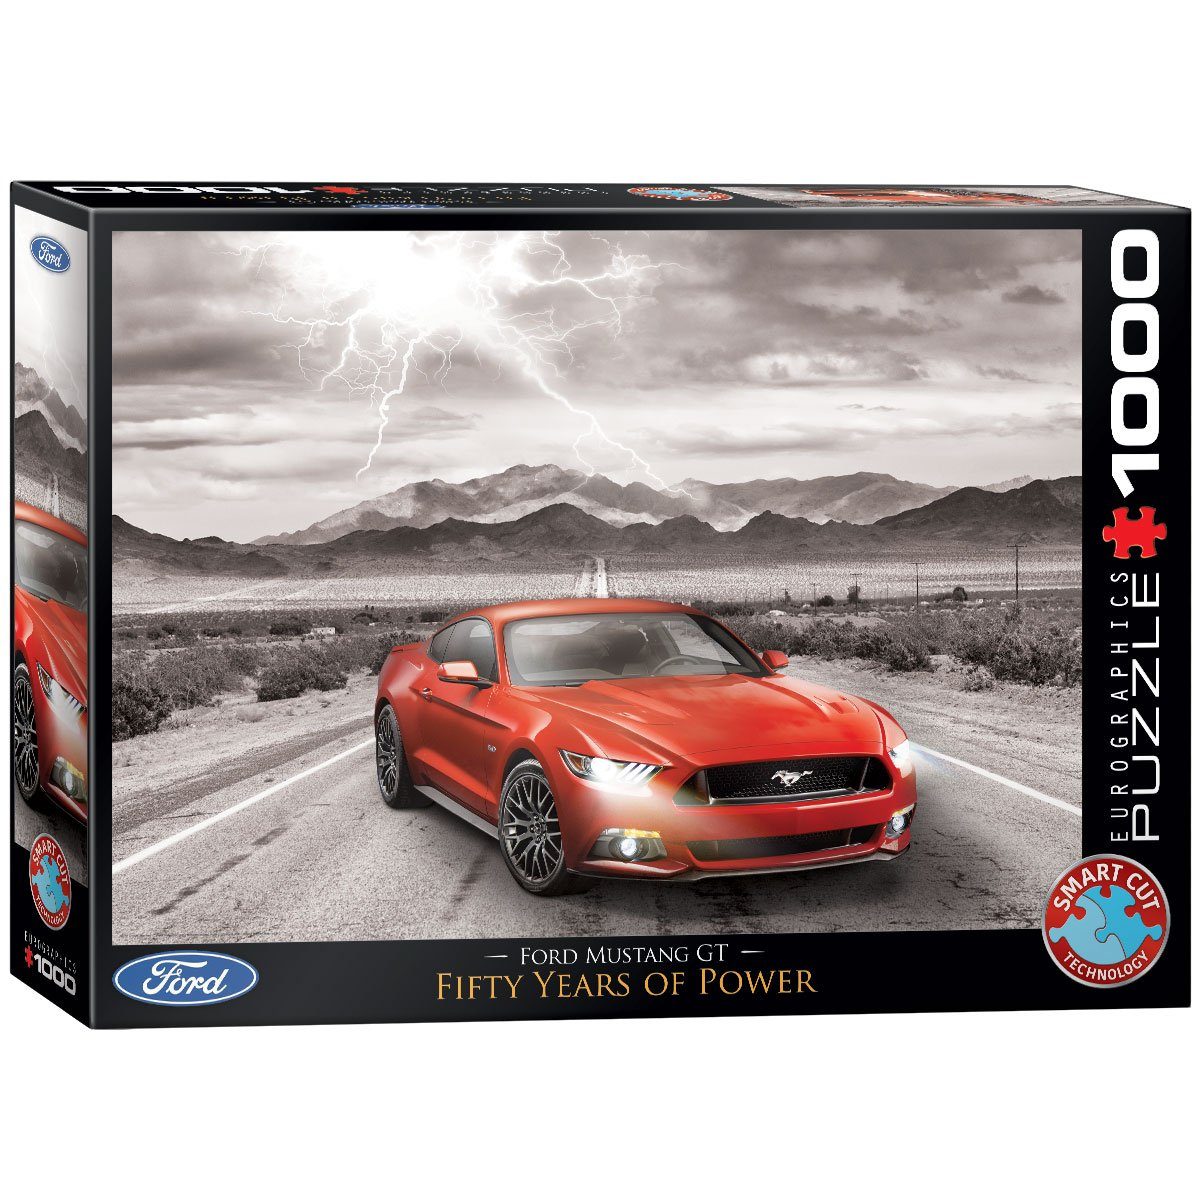 EUROGRAPHICS Puzzle Eurographics 6000-0702 Ford Mustang GT Puzzle, 1000 Puzzleteile